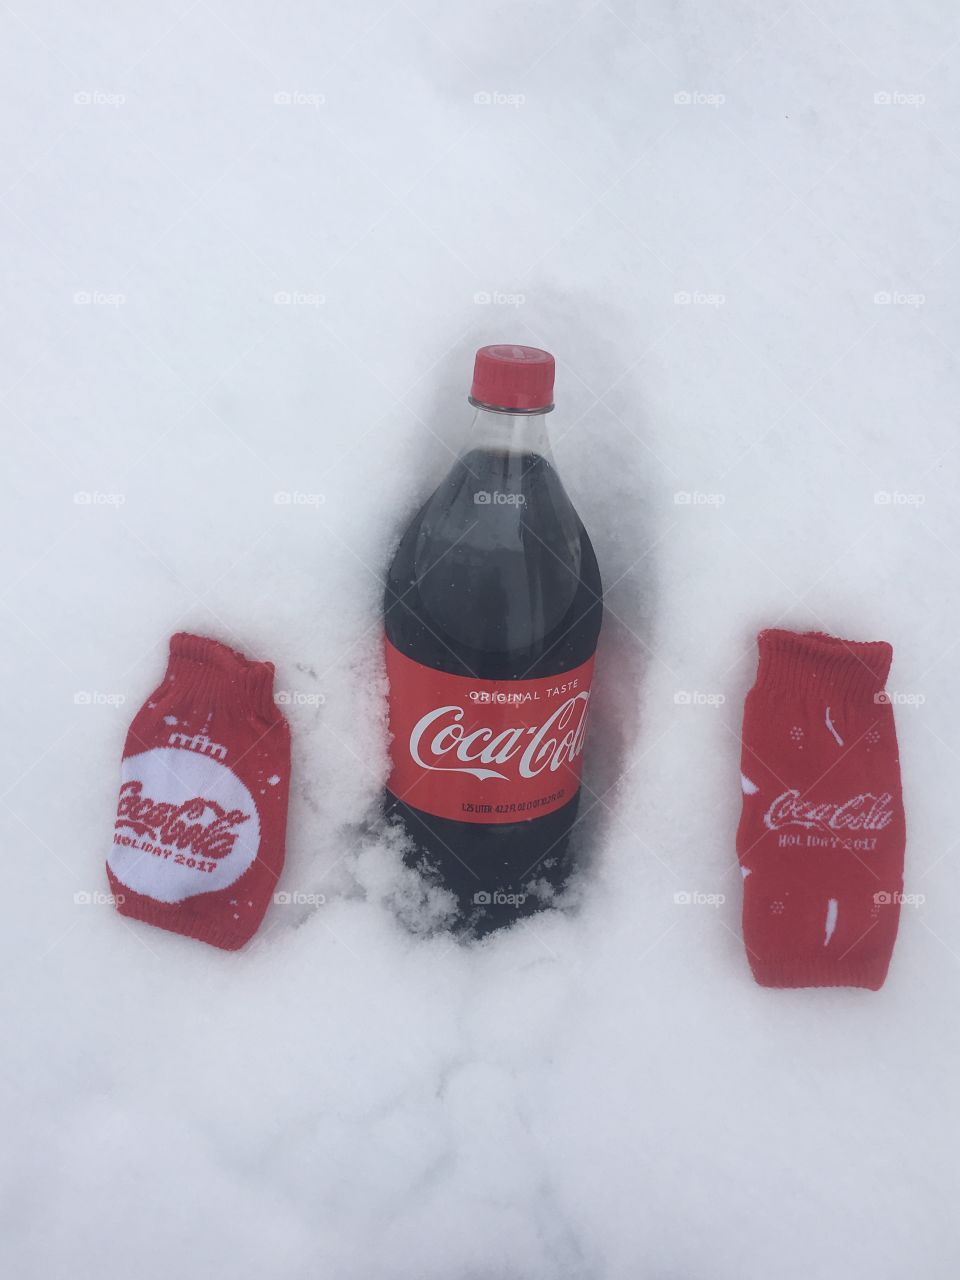 A classic bottle of coke and two coke can sleeves sitting in the freshly fallen cold snow 